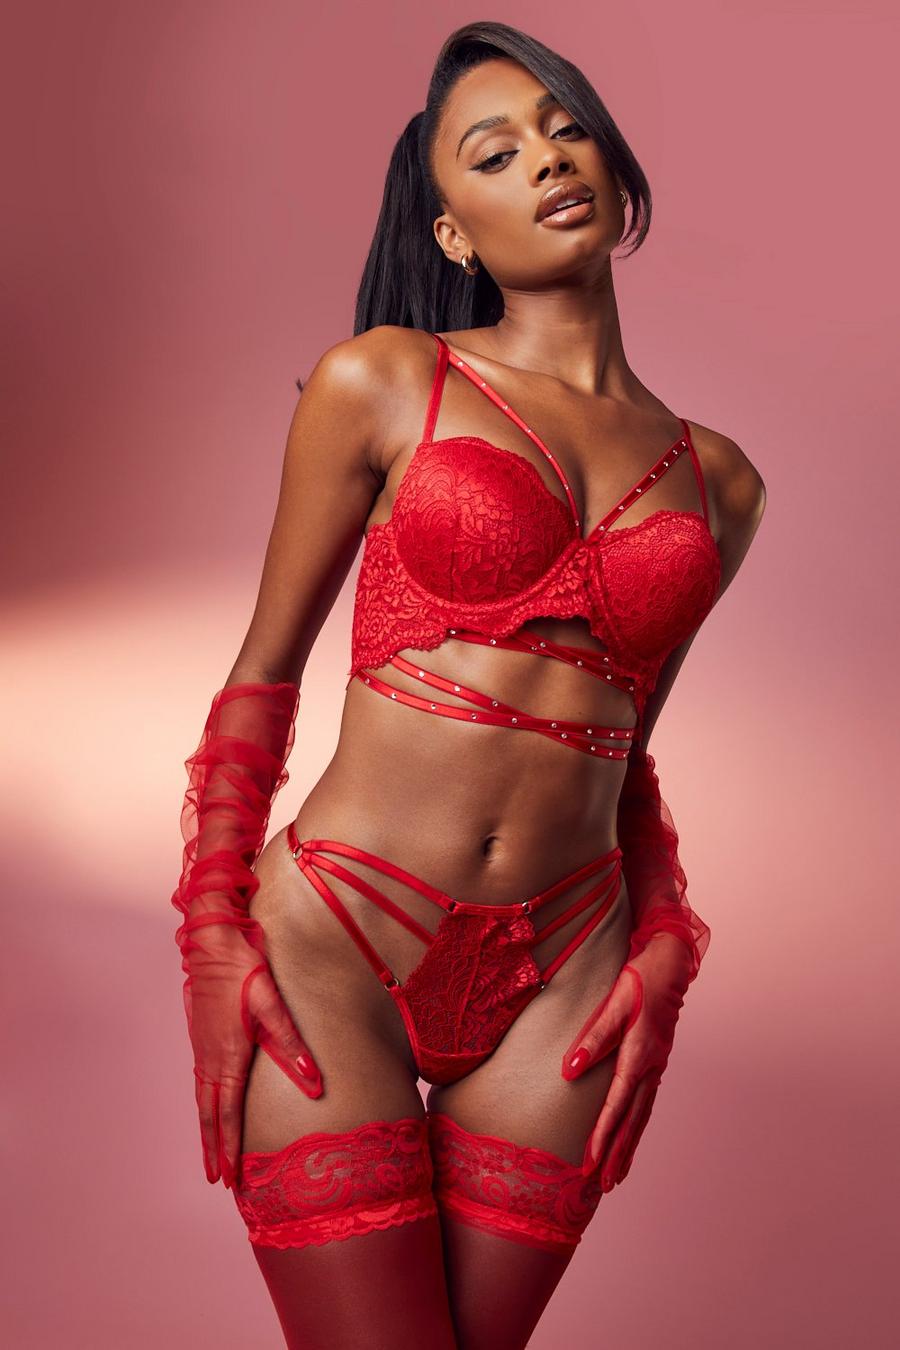 https://media.boohoo.com/i/boohoo/lzz00898_red_xl/female-red-strapping-and-diamante-lace-super-push-up-bra/?w=900&qlt=default&fmt.jp2.qlt=70&fmt=auto&sm=fit